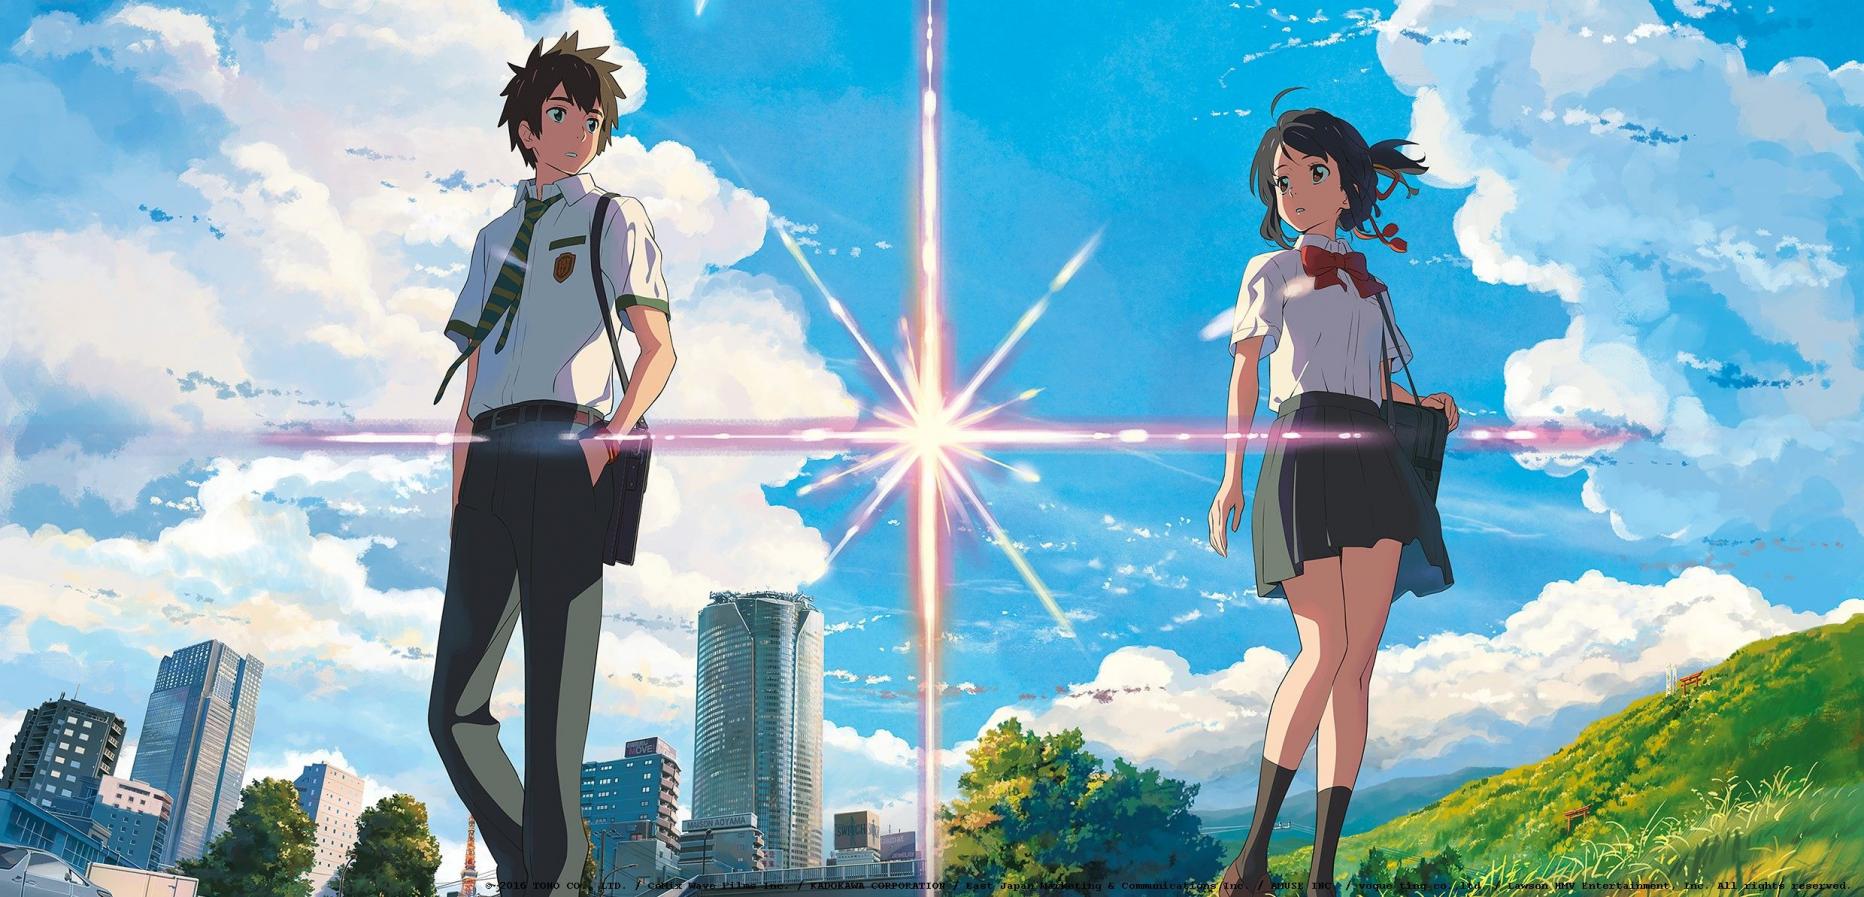 Your Name (1)